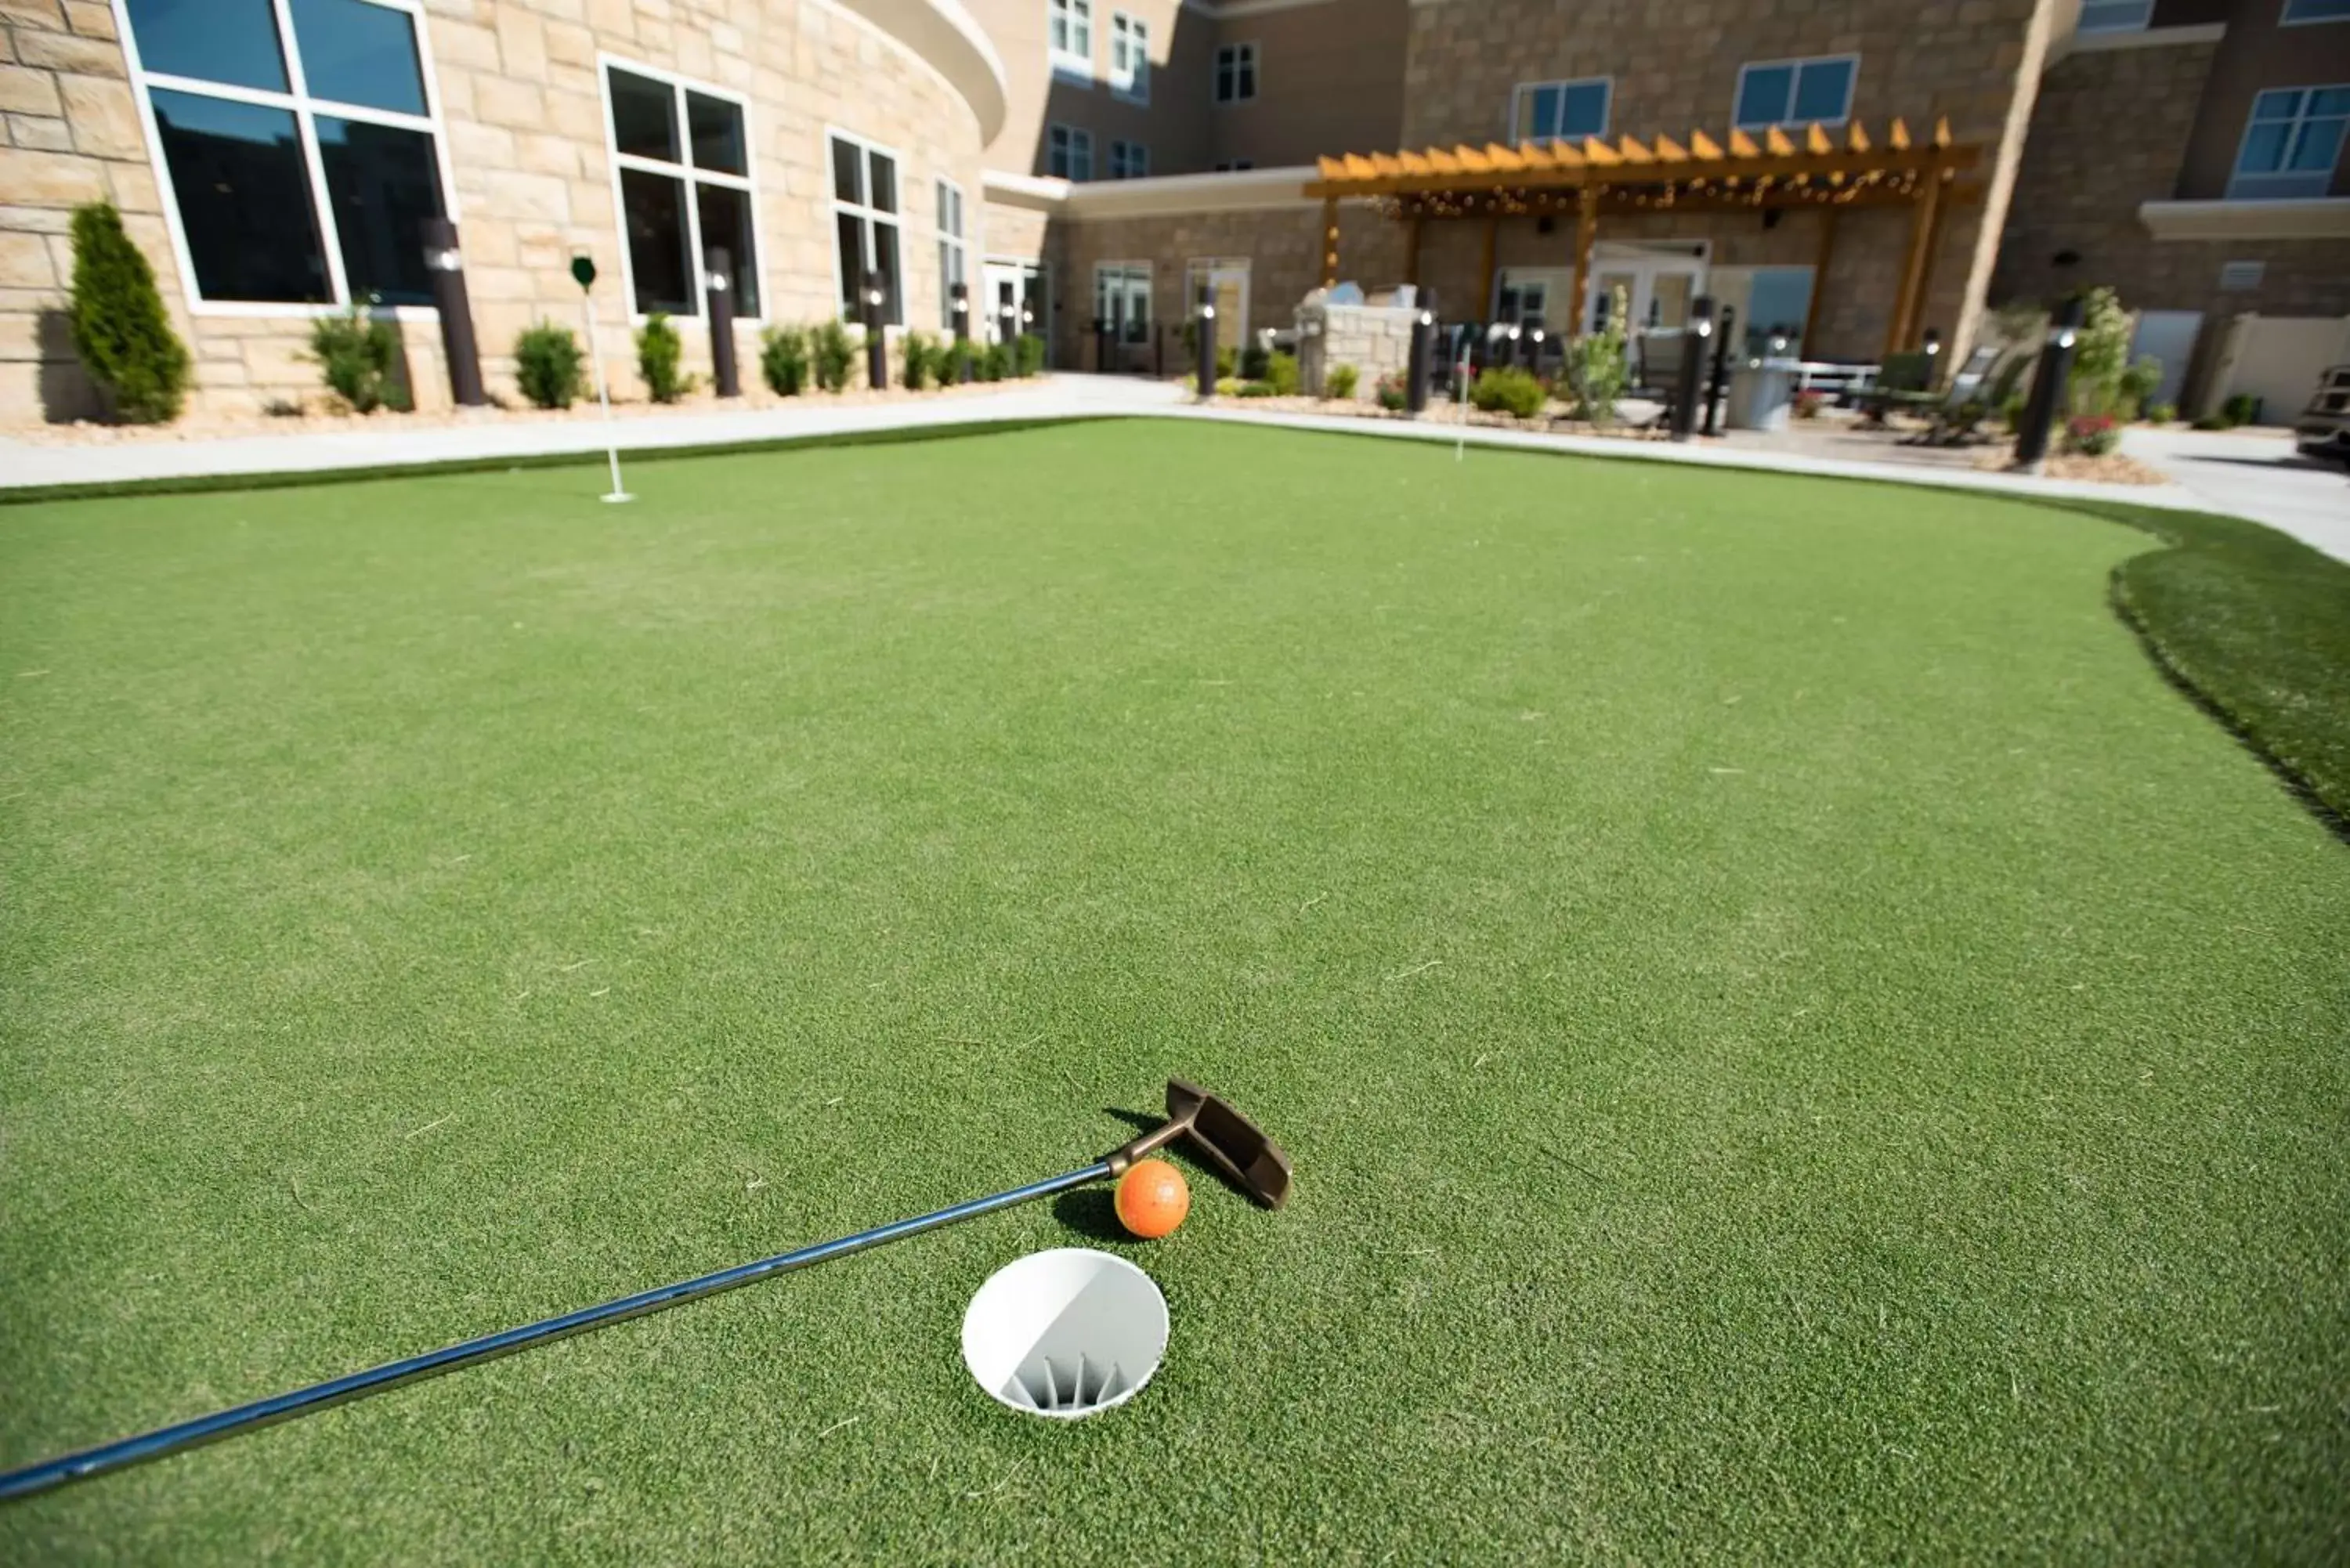 Sports, Other Activities in Homewood Suites By Hilton Paducah